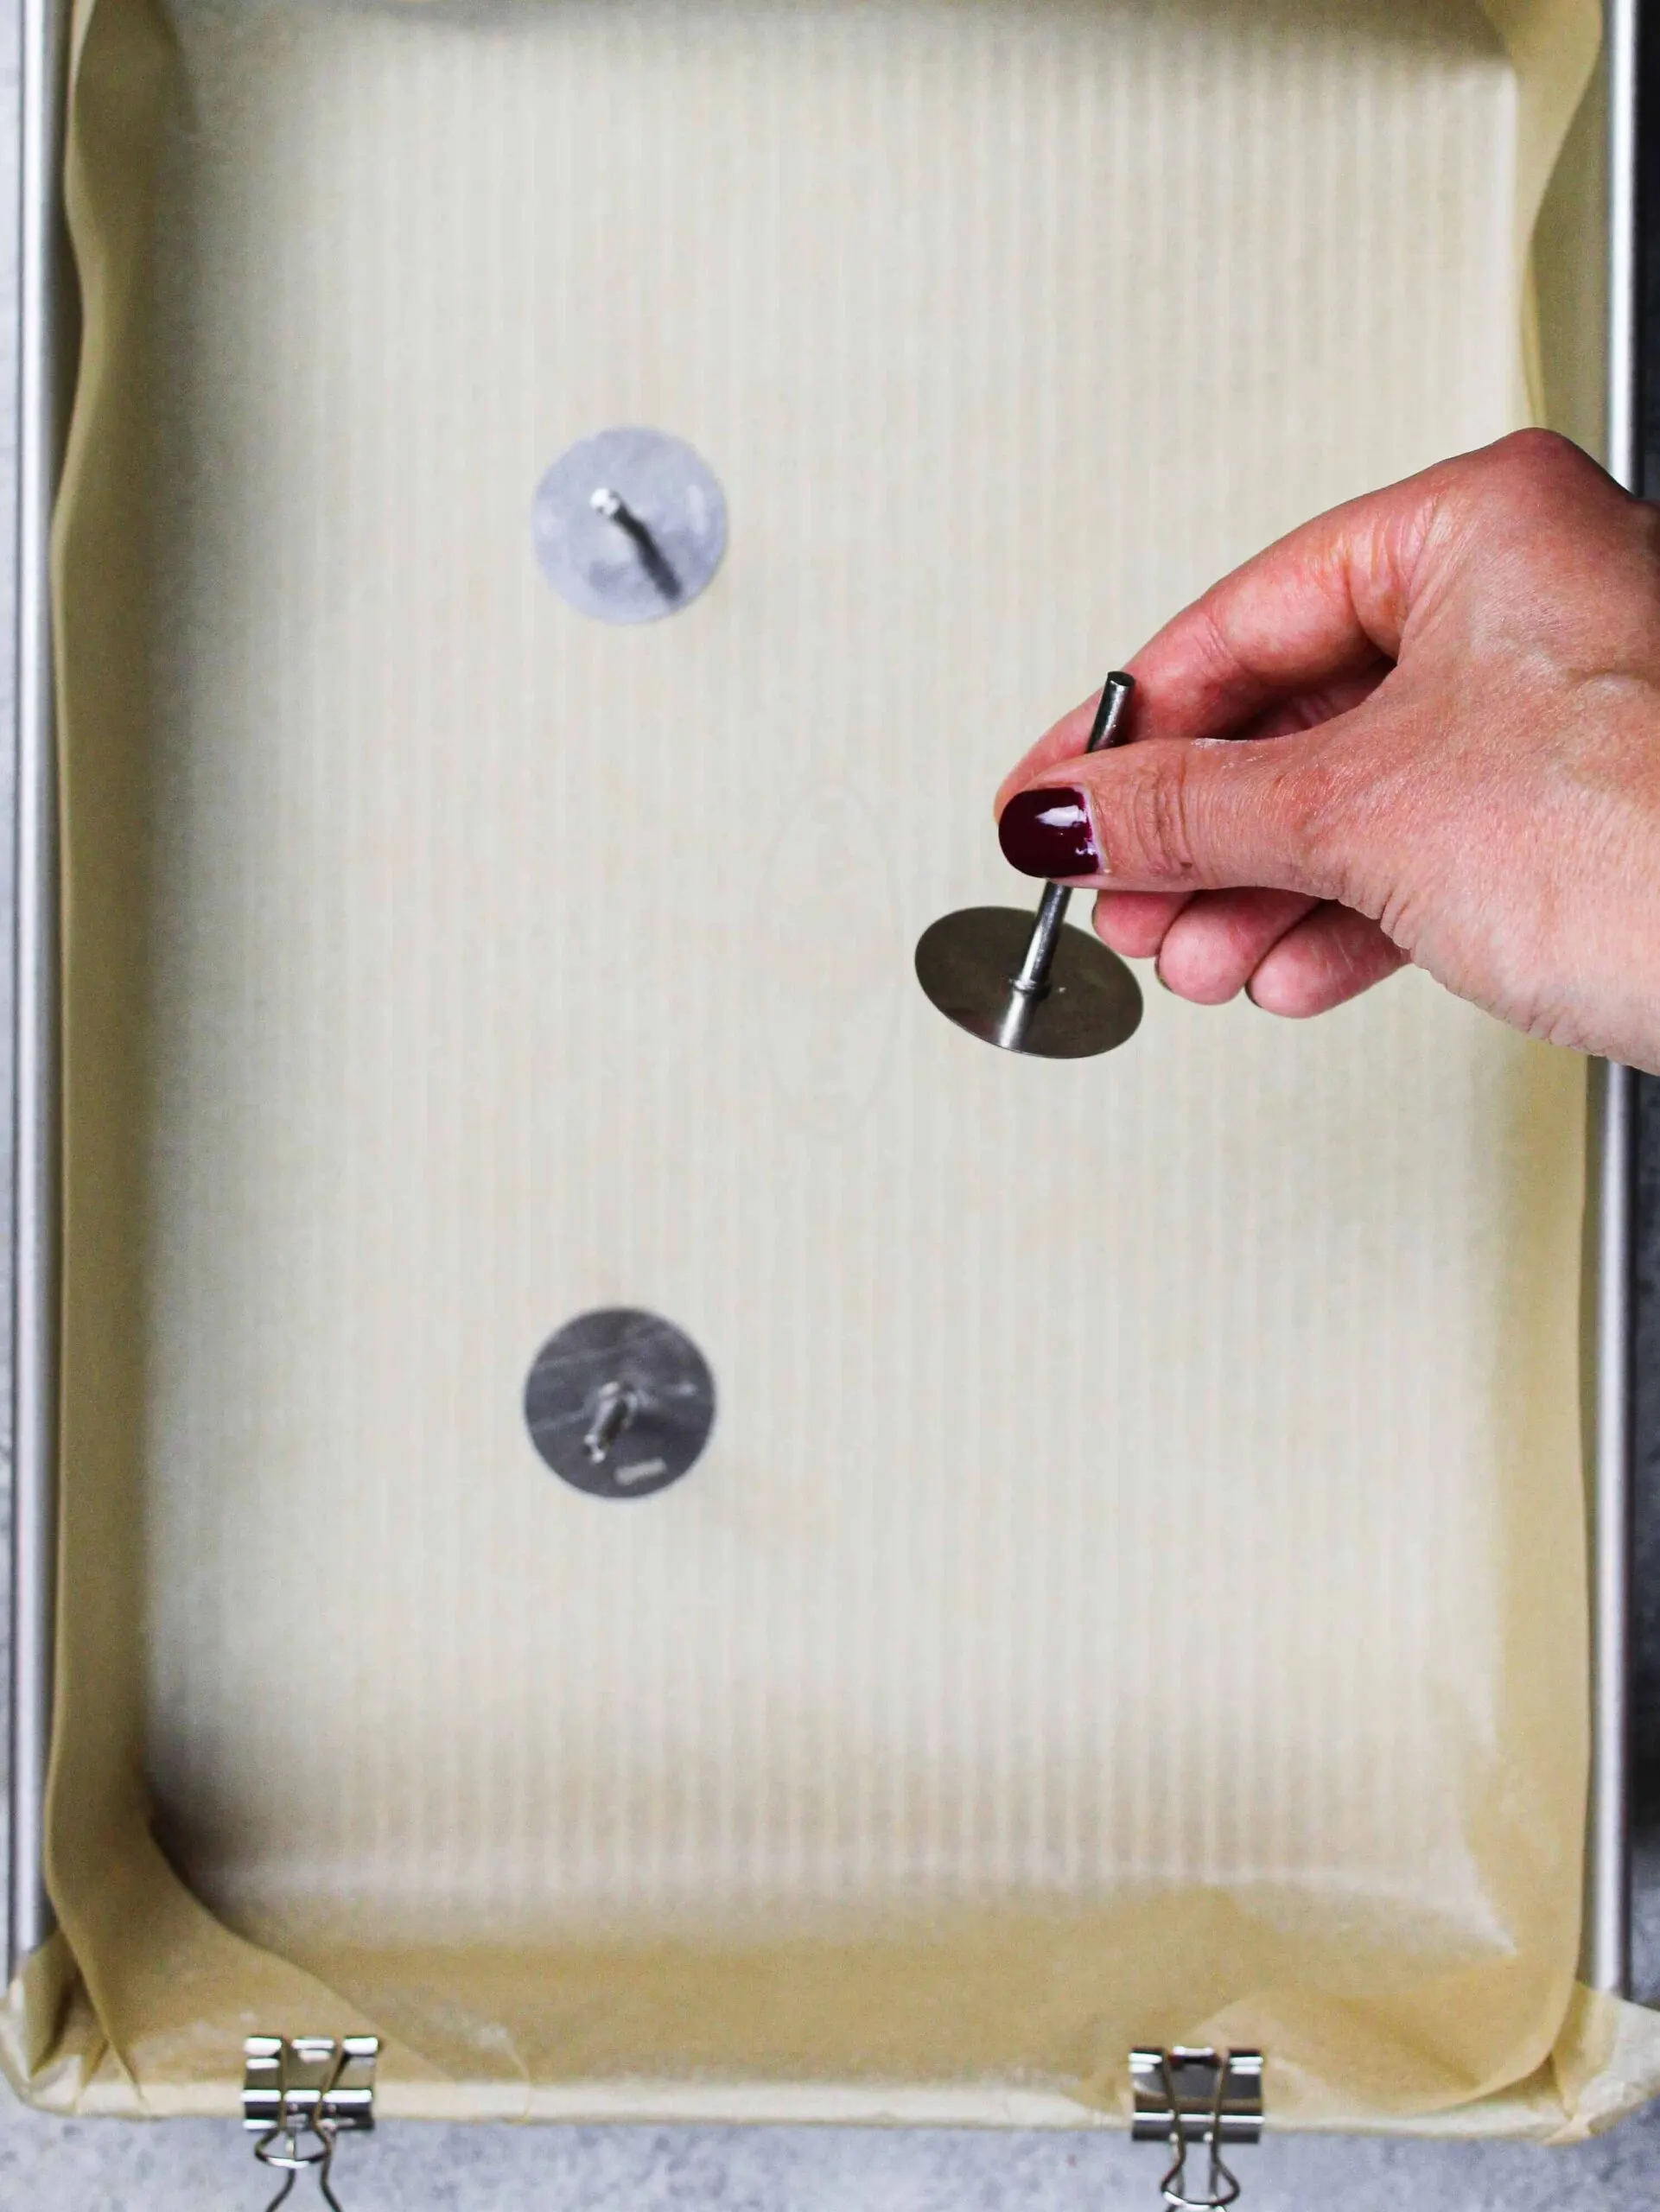 image of sheet cake pan with flower nails being used as heating cores to help the cake bake more quickly and evenly